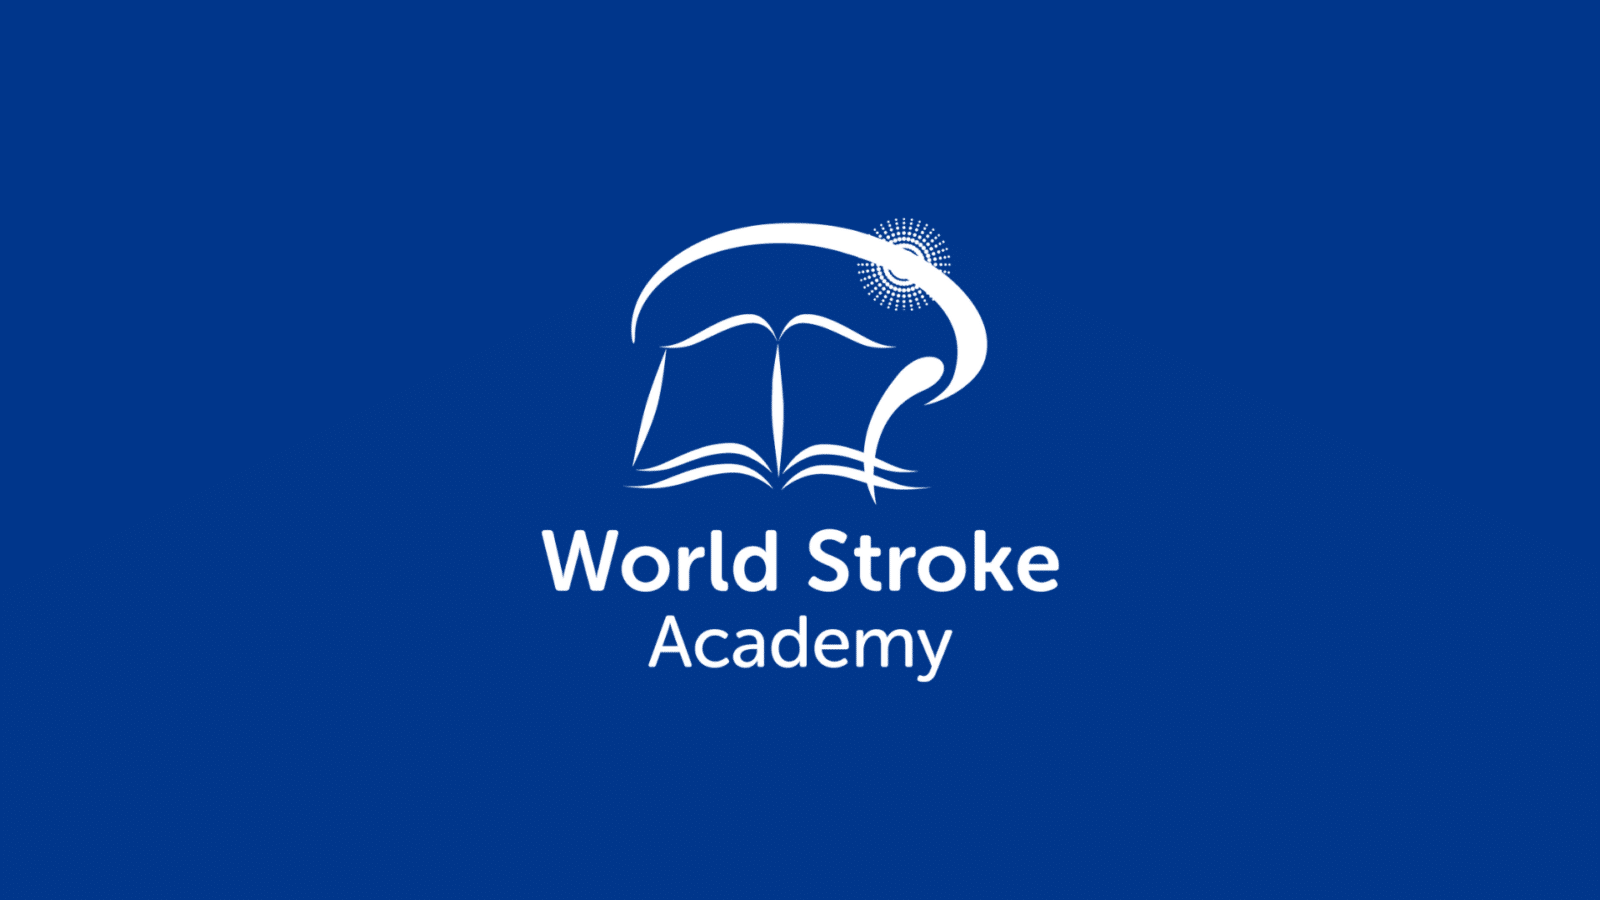 Series #6: COVID-19 and Stroke in Asia